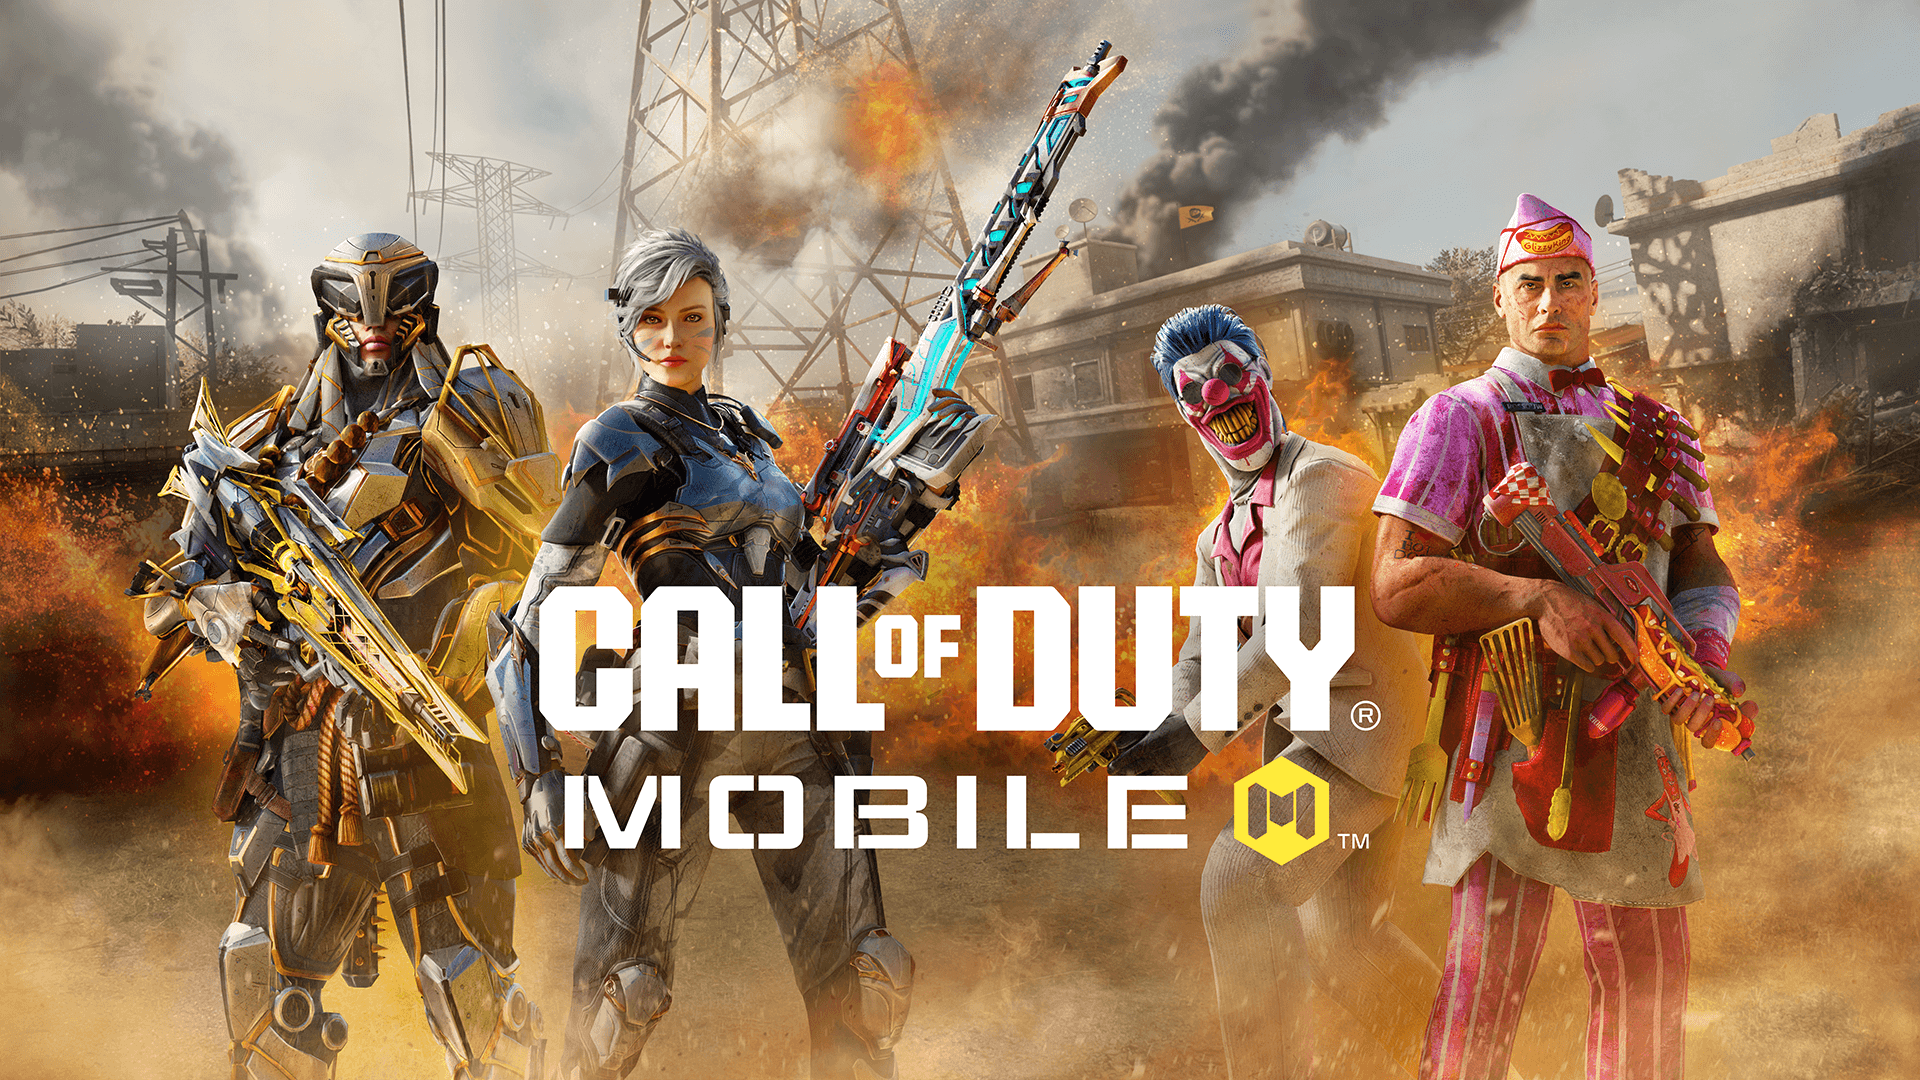 How to Delete CoD Mobile Account: An Easy Step-by-Step Guide